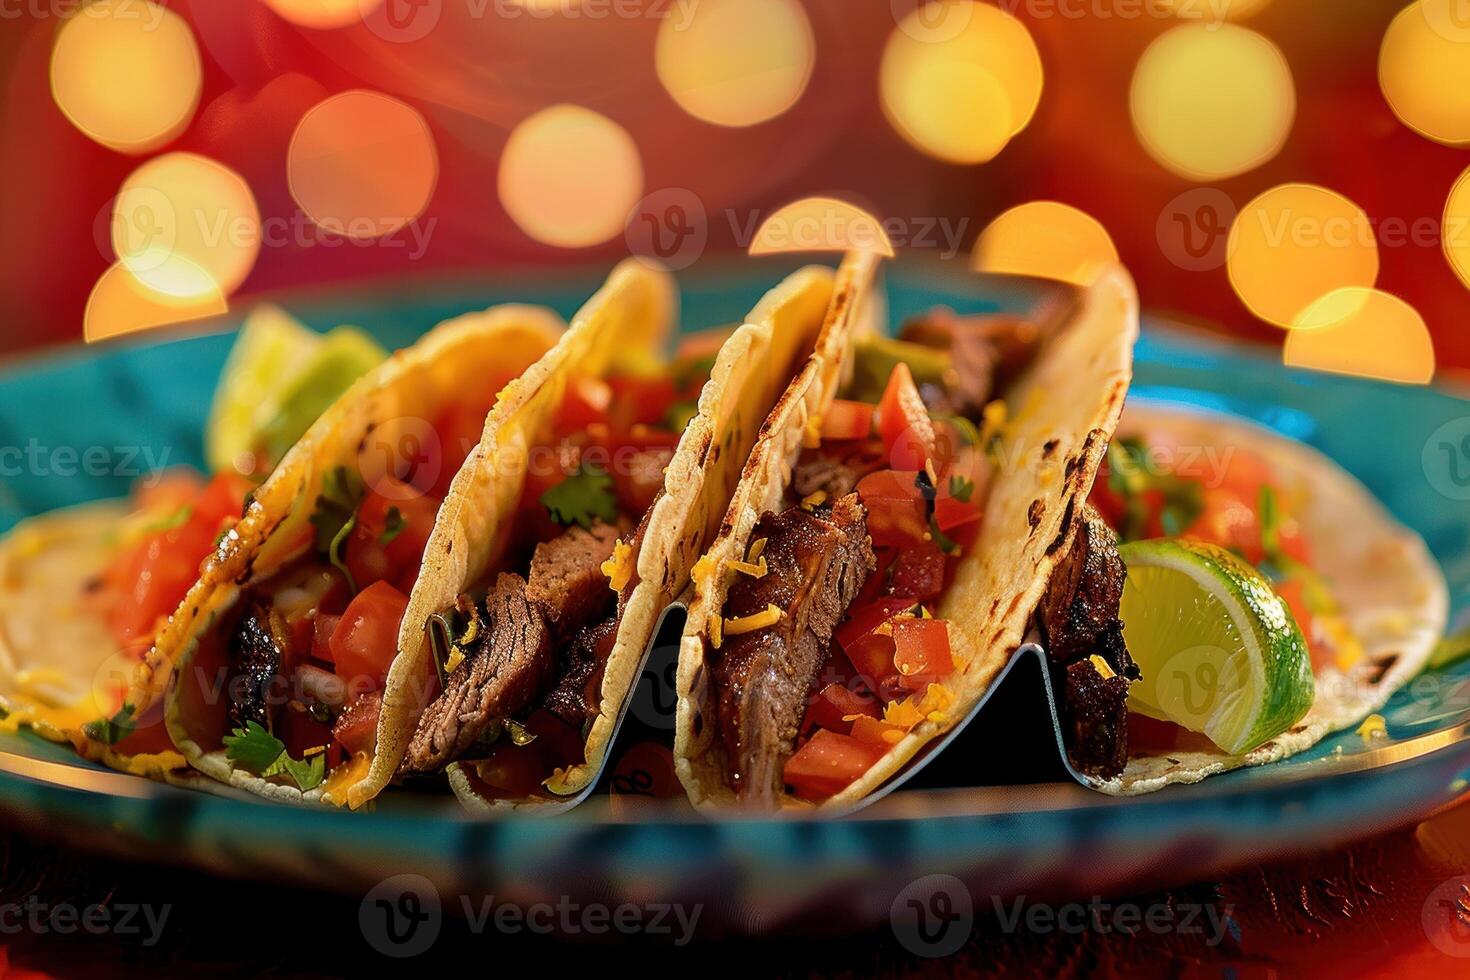 A plate of four tacos with meat and cheese, topped with tomatoes and limes photo